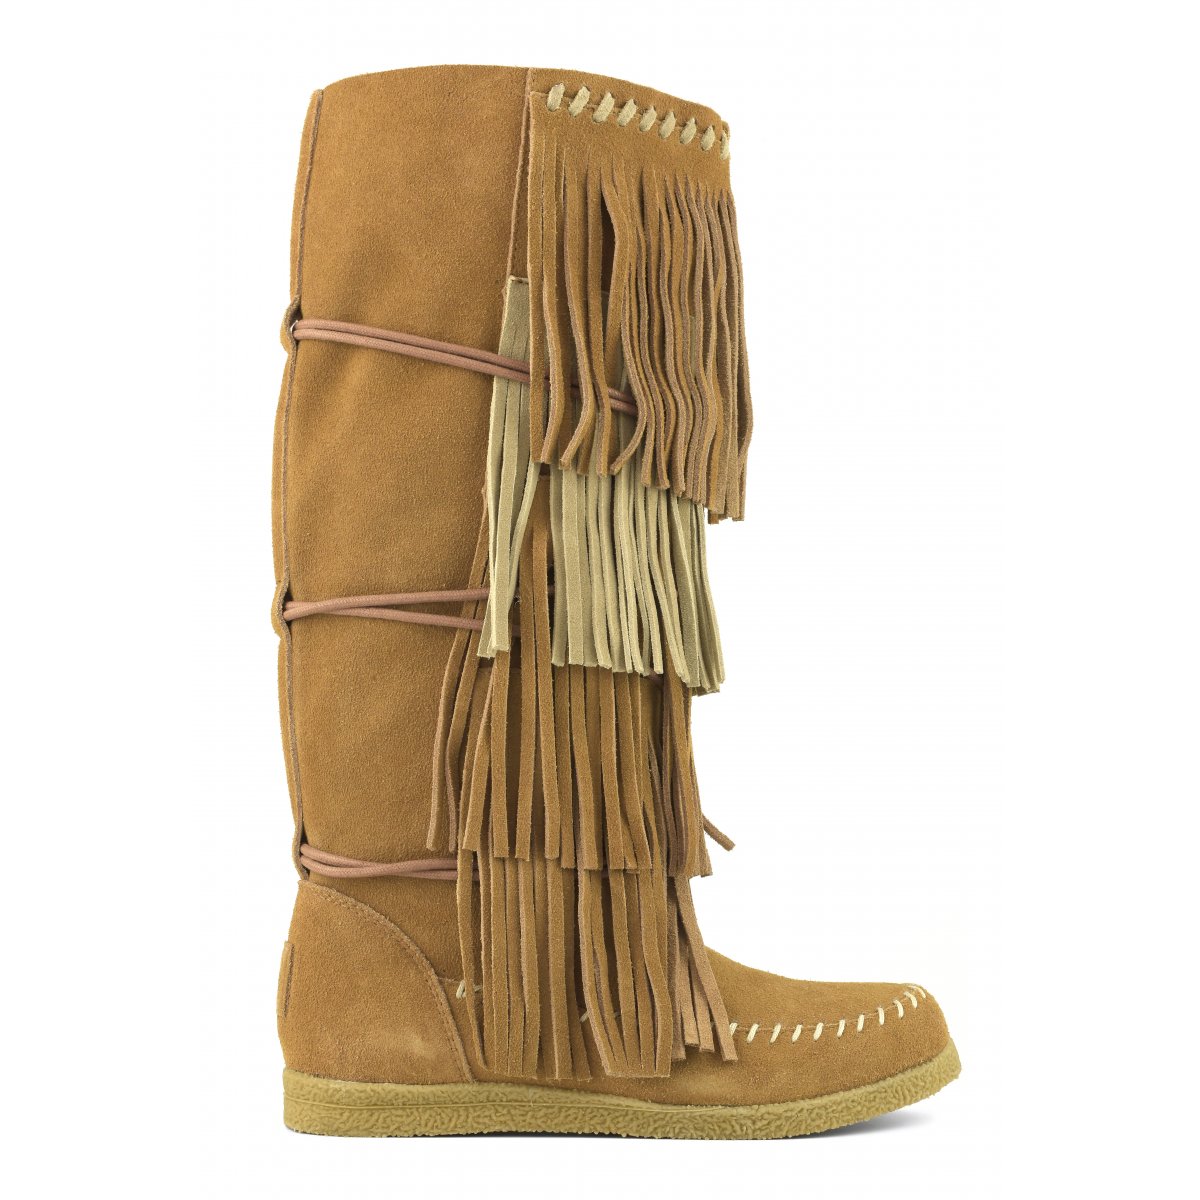 High Indian boot with multi layers of fringes and adjustable lace with ...